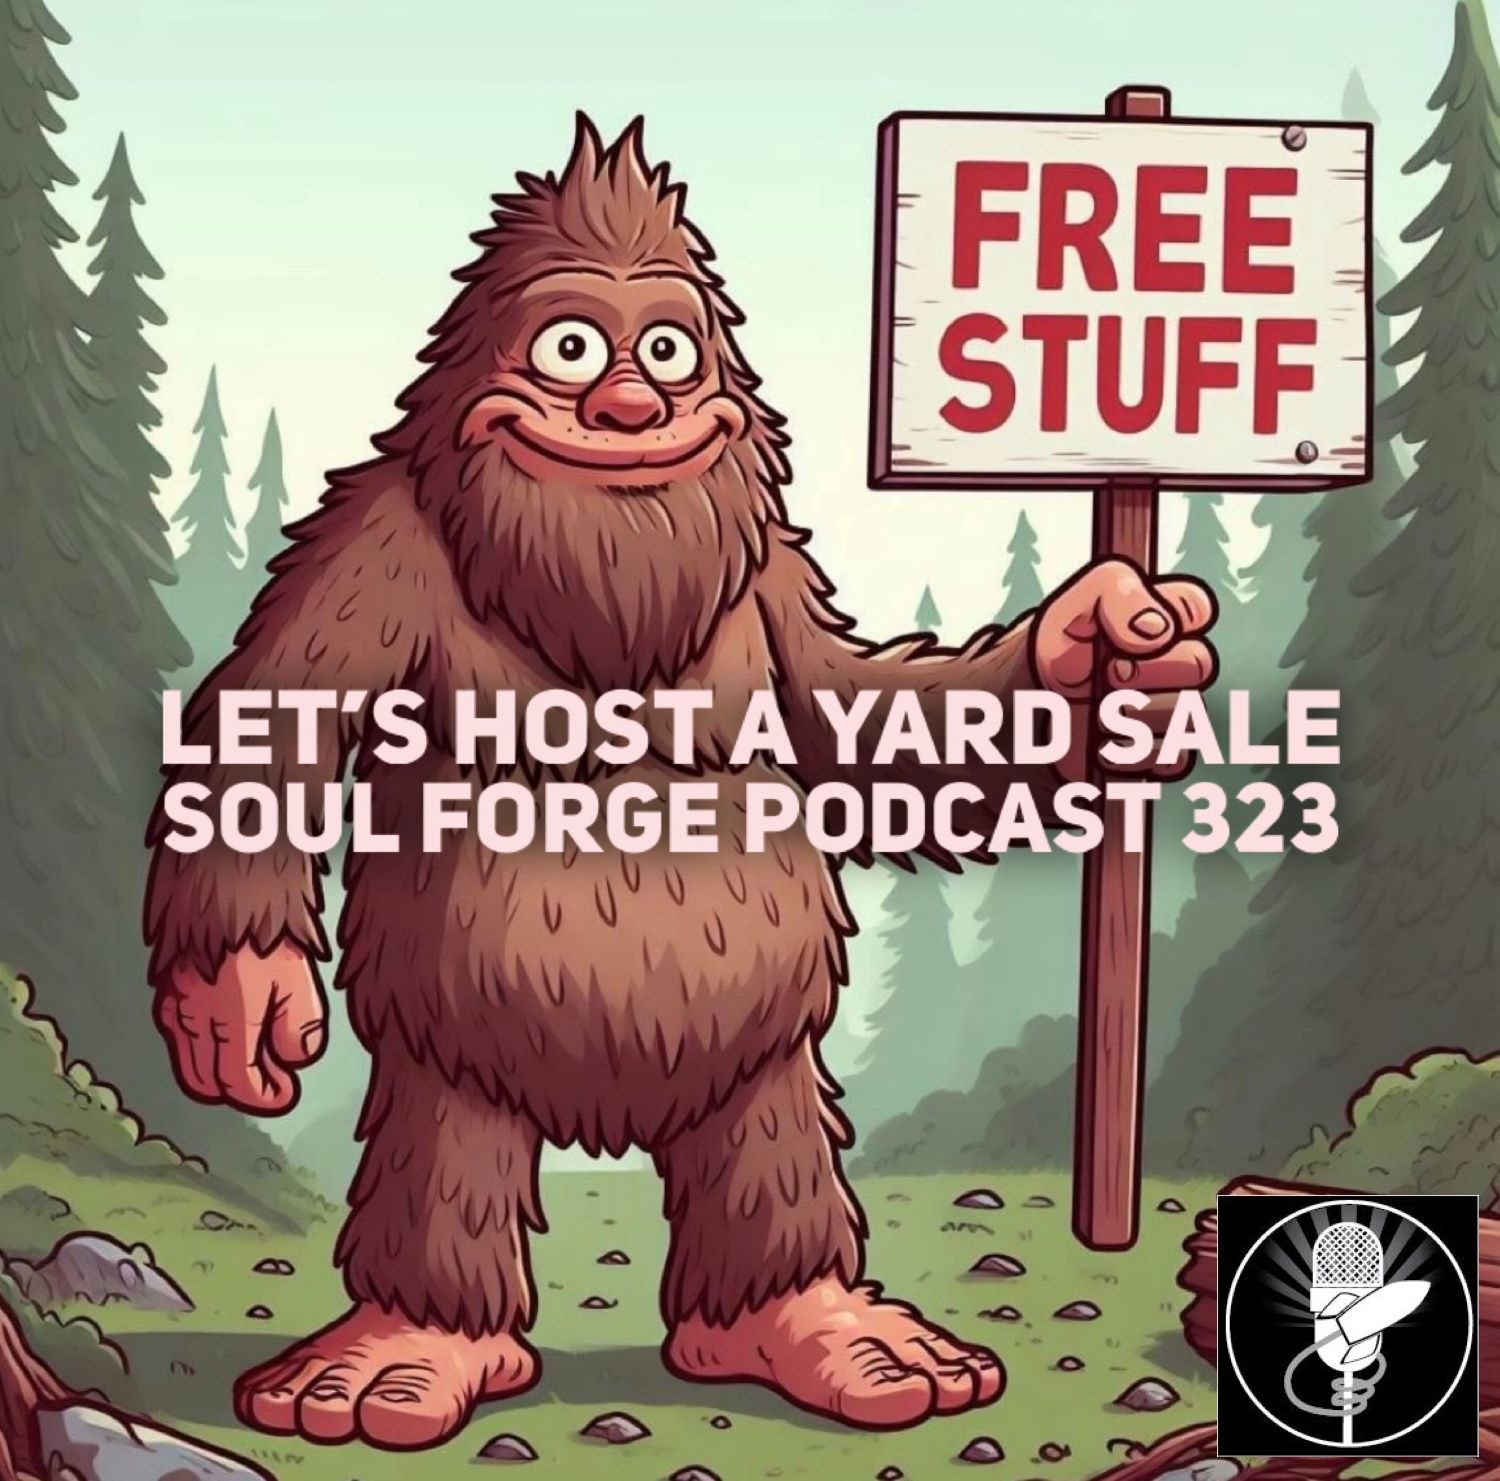 Let's Host A Yard Sale